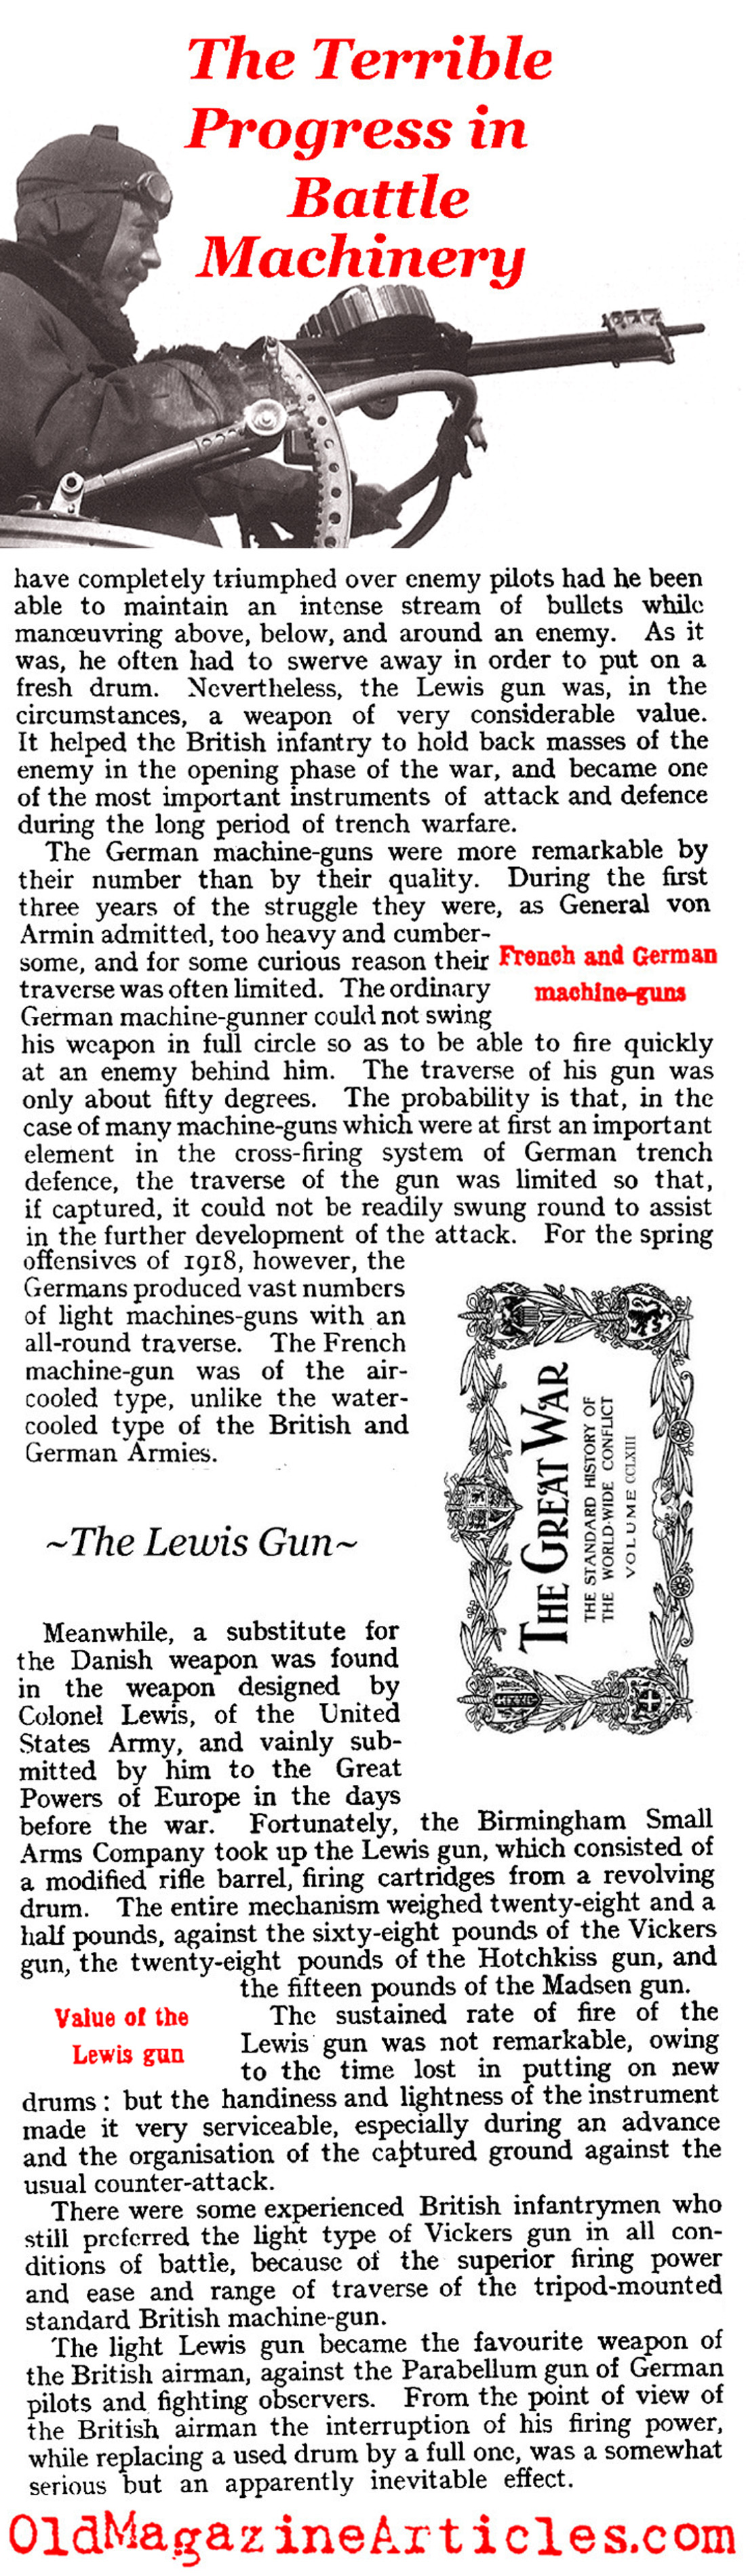 The Lewis Gun (The Great War Monthly, 1918)